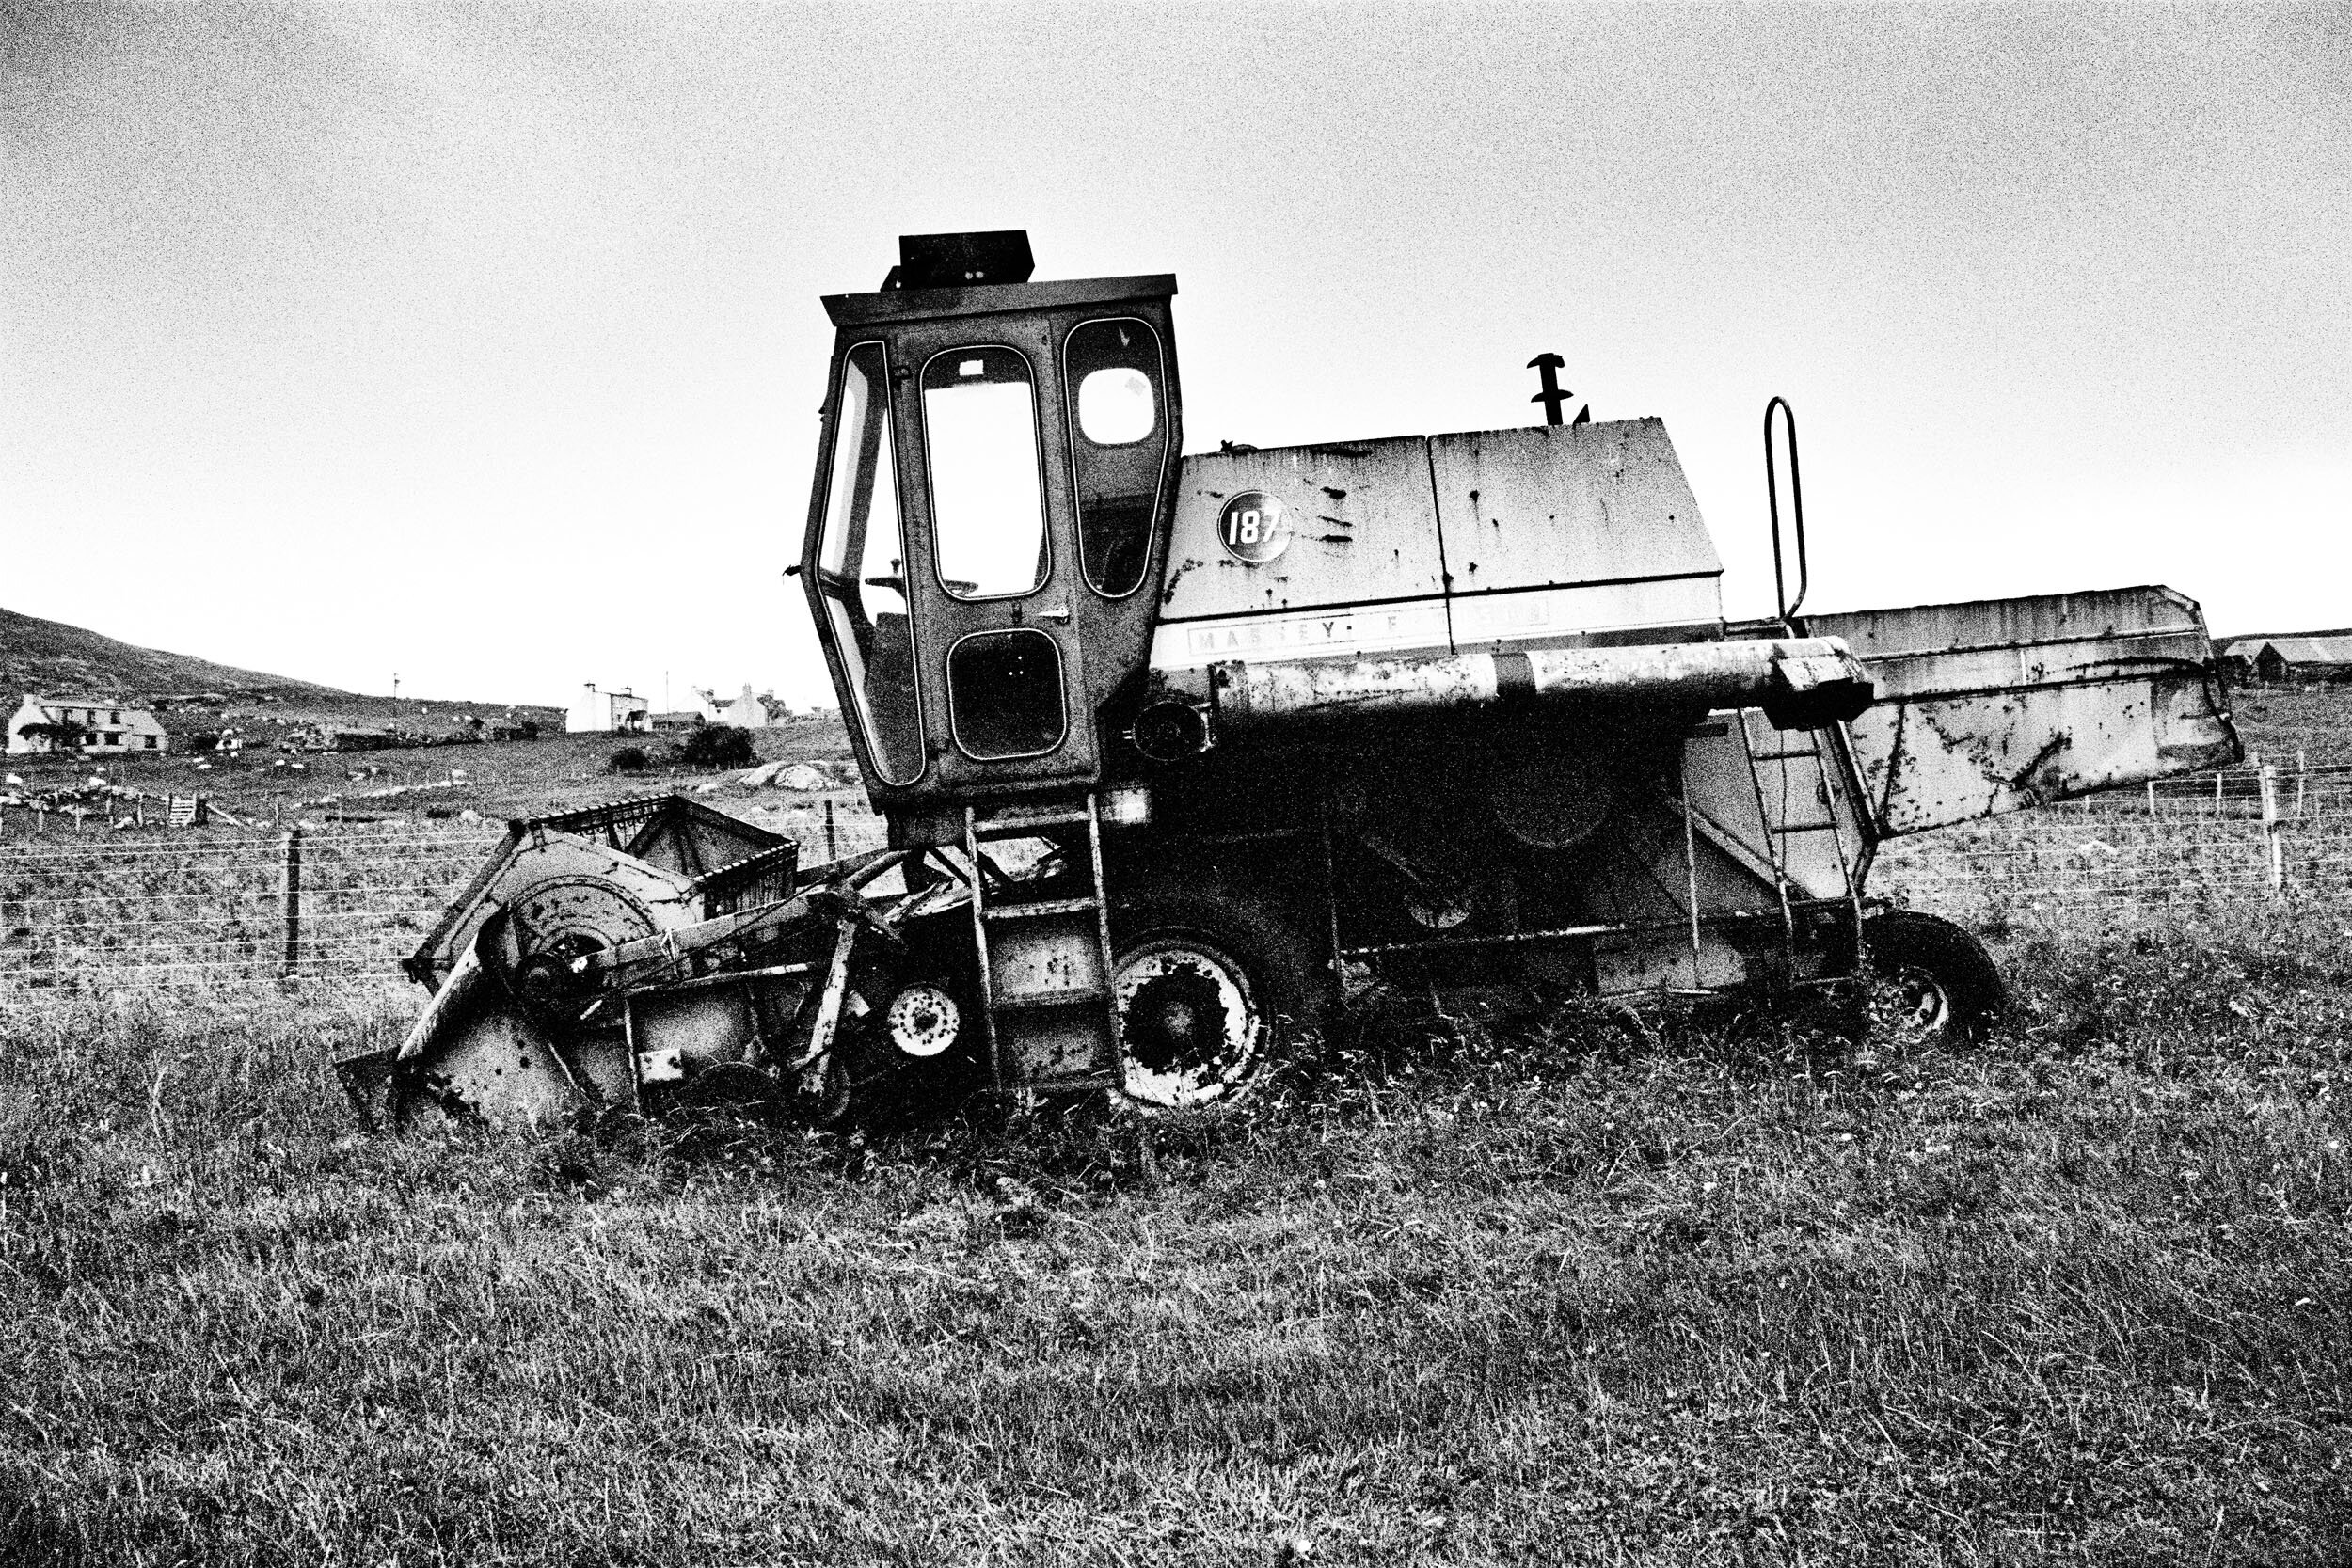  The Old Combine, Isle of Berneray, 2018 